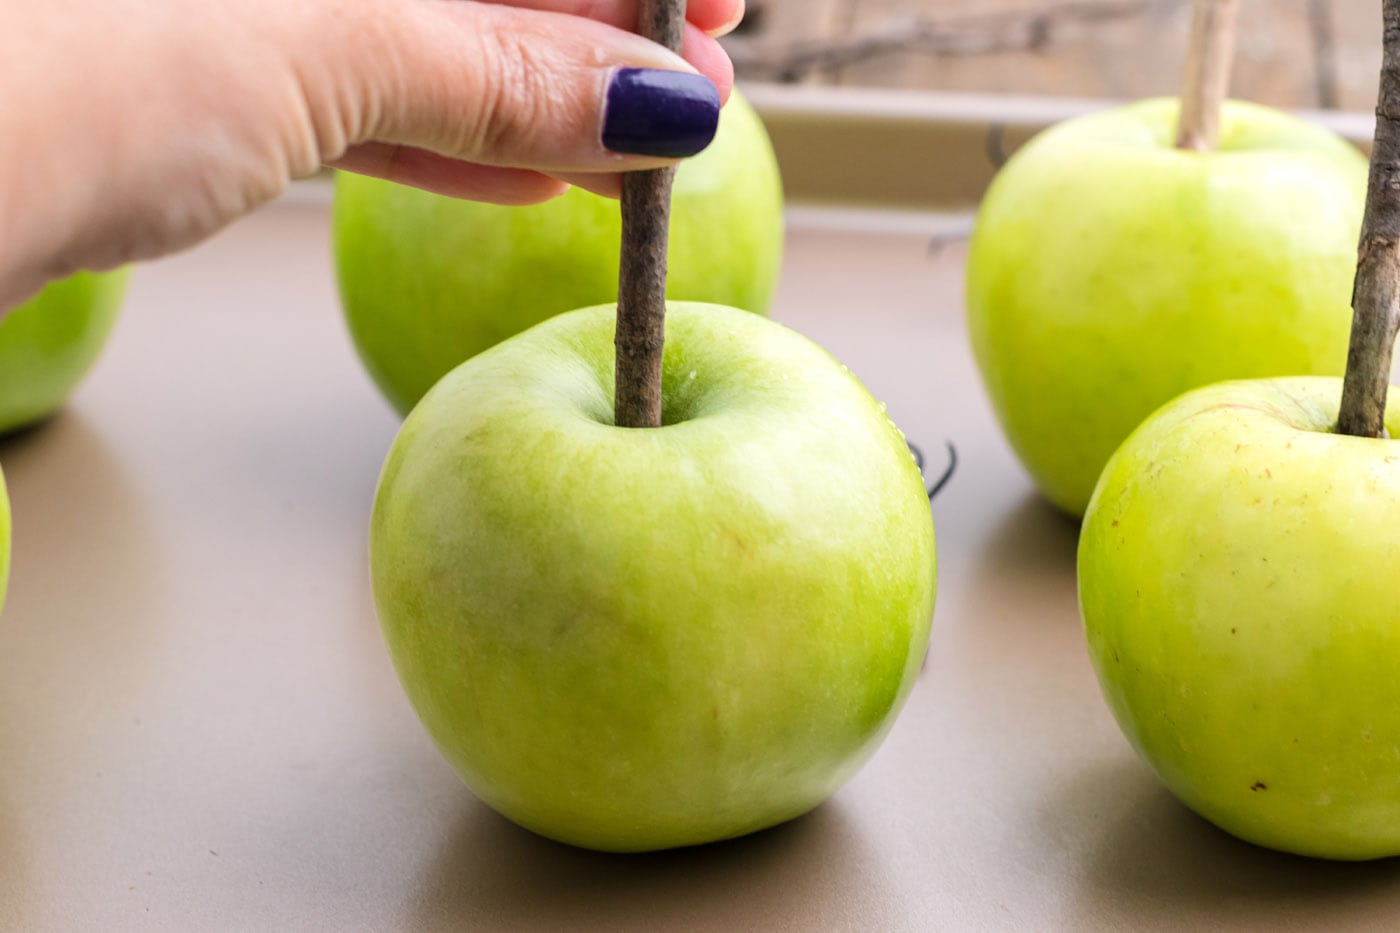 hand placing a stick into a green apple